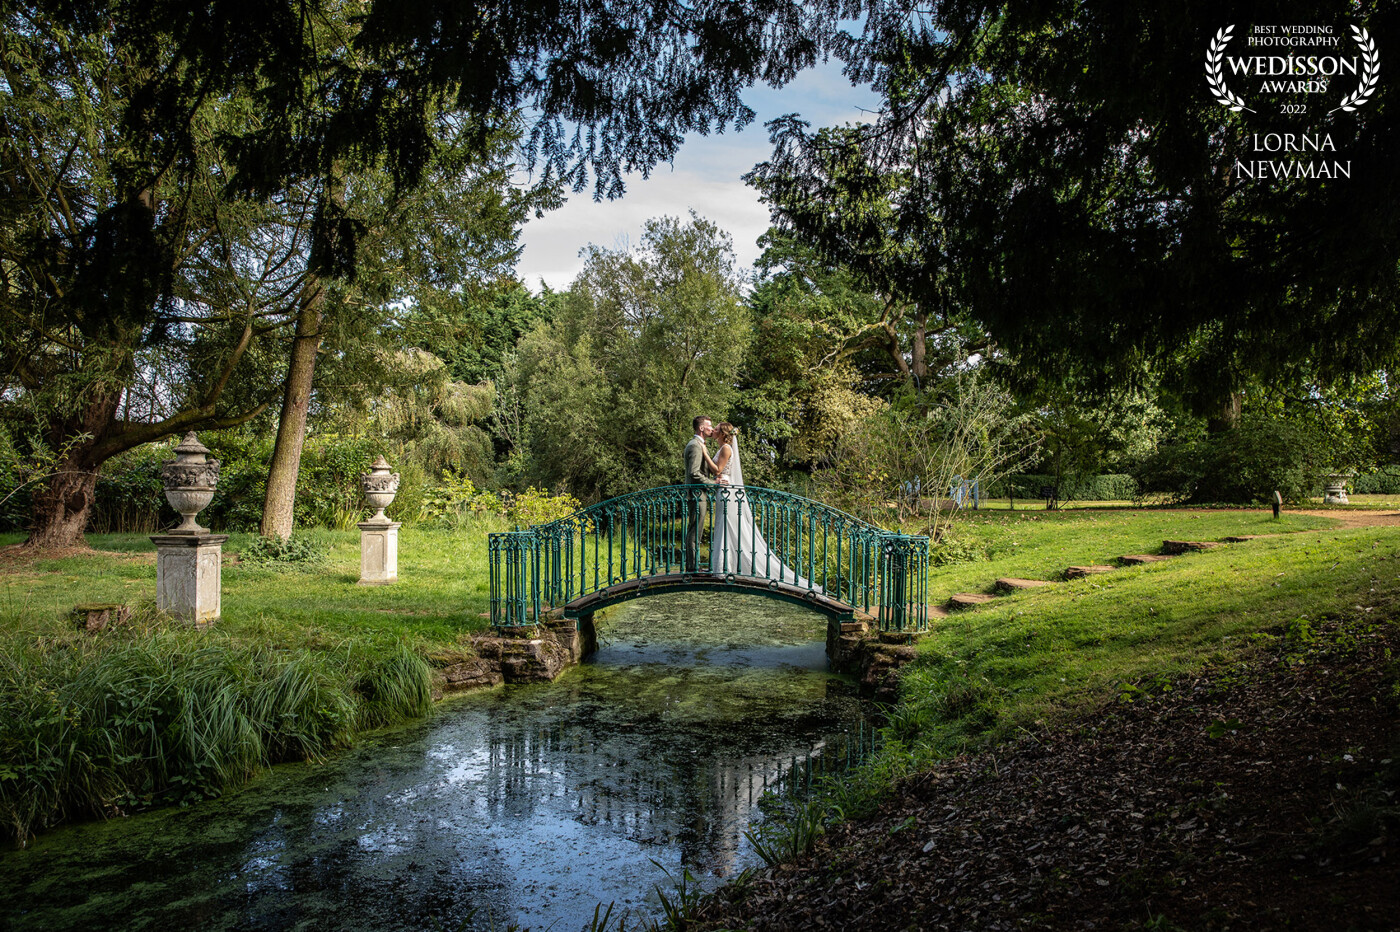 A shot from Charlie & Paul’s wedding at Shuttleworth in Biggleswade, Bedfordshire.<br />
We took a walk down the beautiful Swiss Gardens to give them a moment alone after they got married,  and had to take advantage of this pretty bridge that is right at the center ????  I love this location, it looks like something out of a painting....<br />
.<br />
.<br />
.